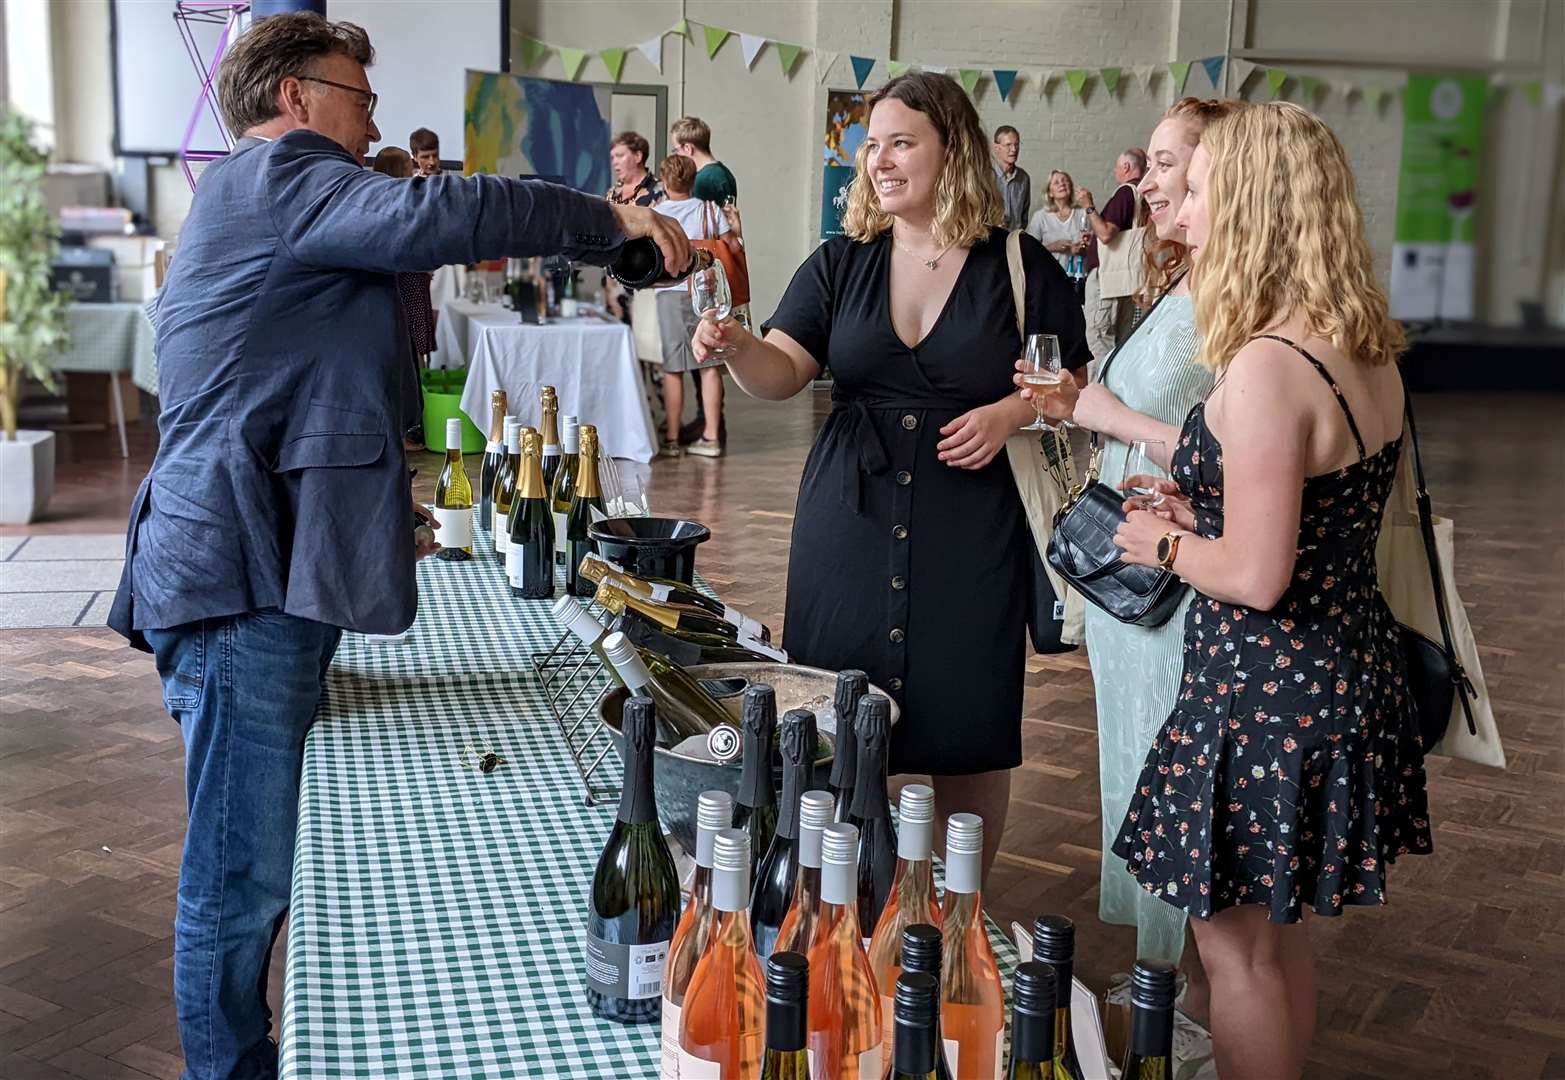 Canterbury Wine Festival will return to Westgate Hall this May for a third year. Picture: Canterbury Wine Festival / Carlos Dominguez